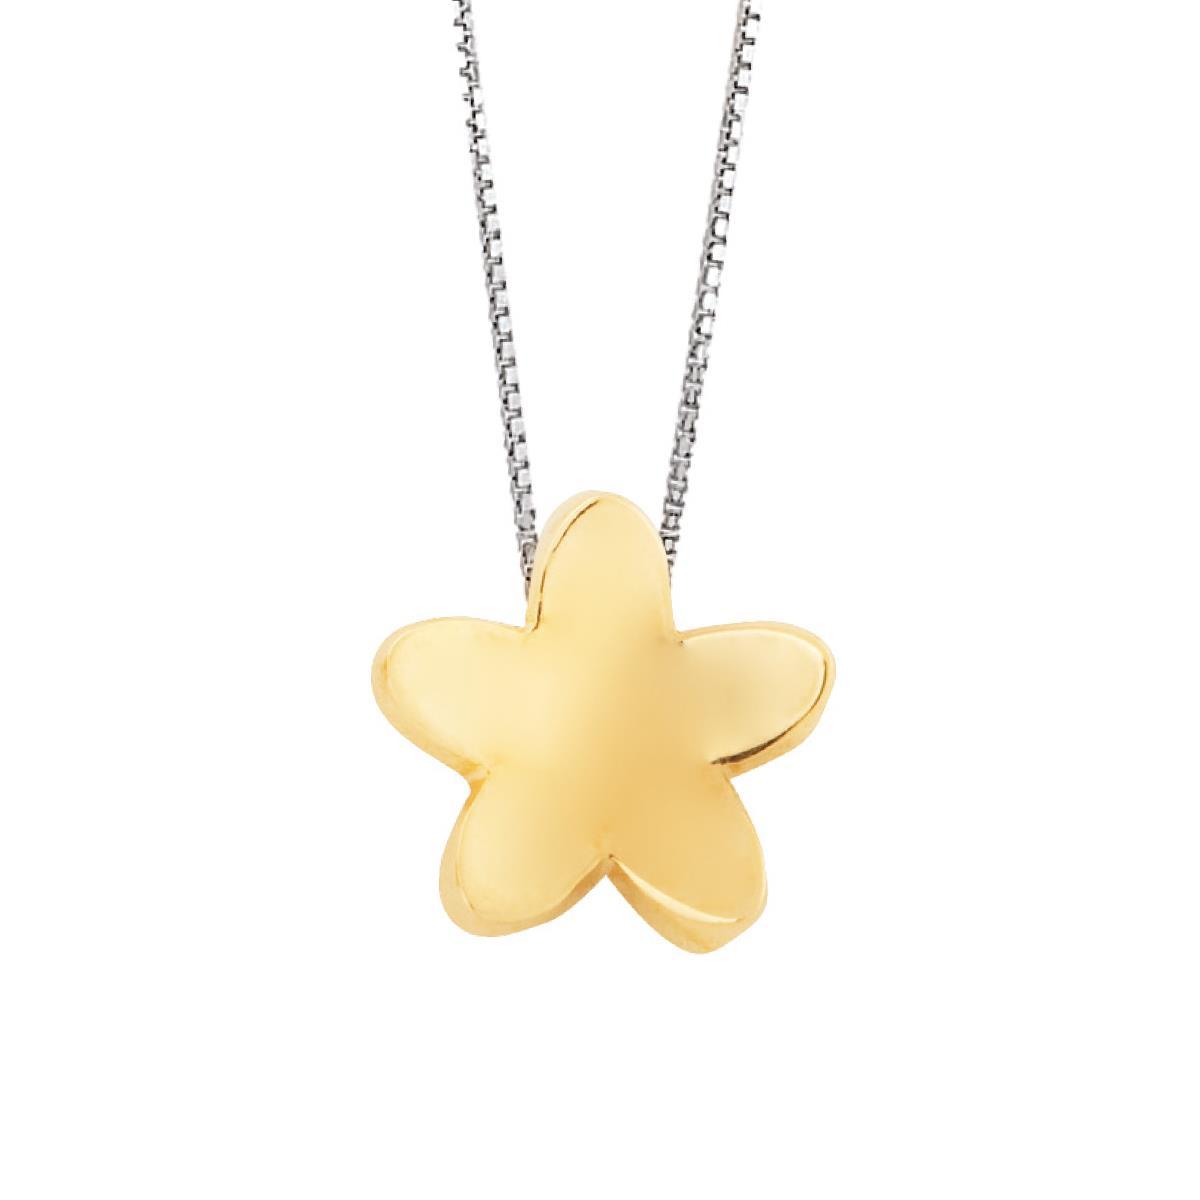 Fiore necklace in 18kt yellow gold - CEA2716-LN